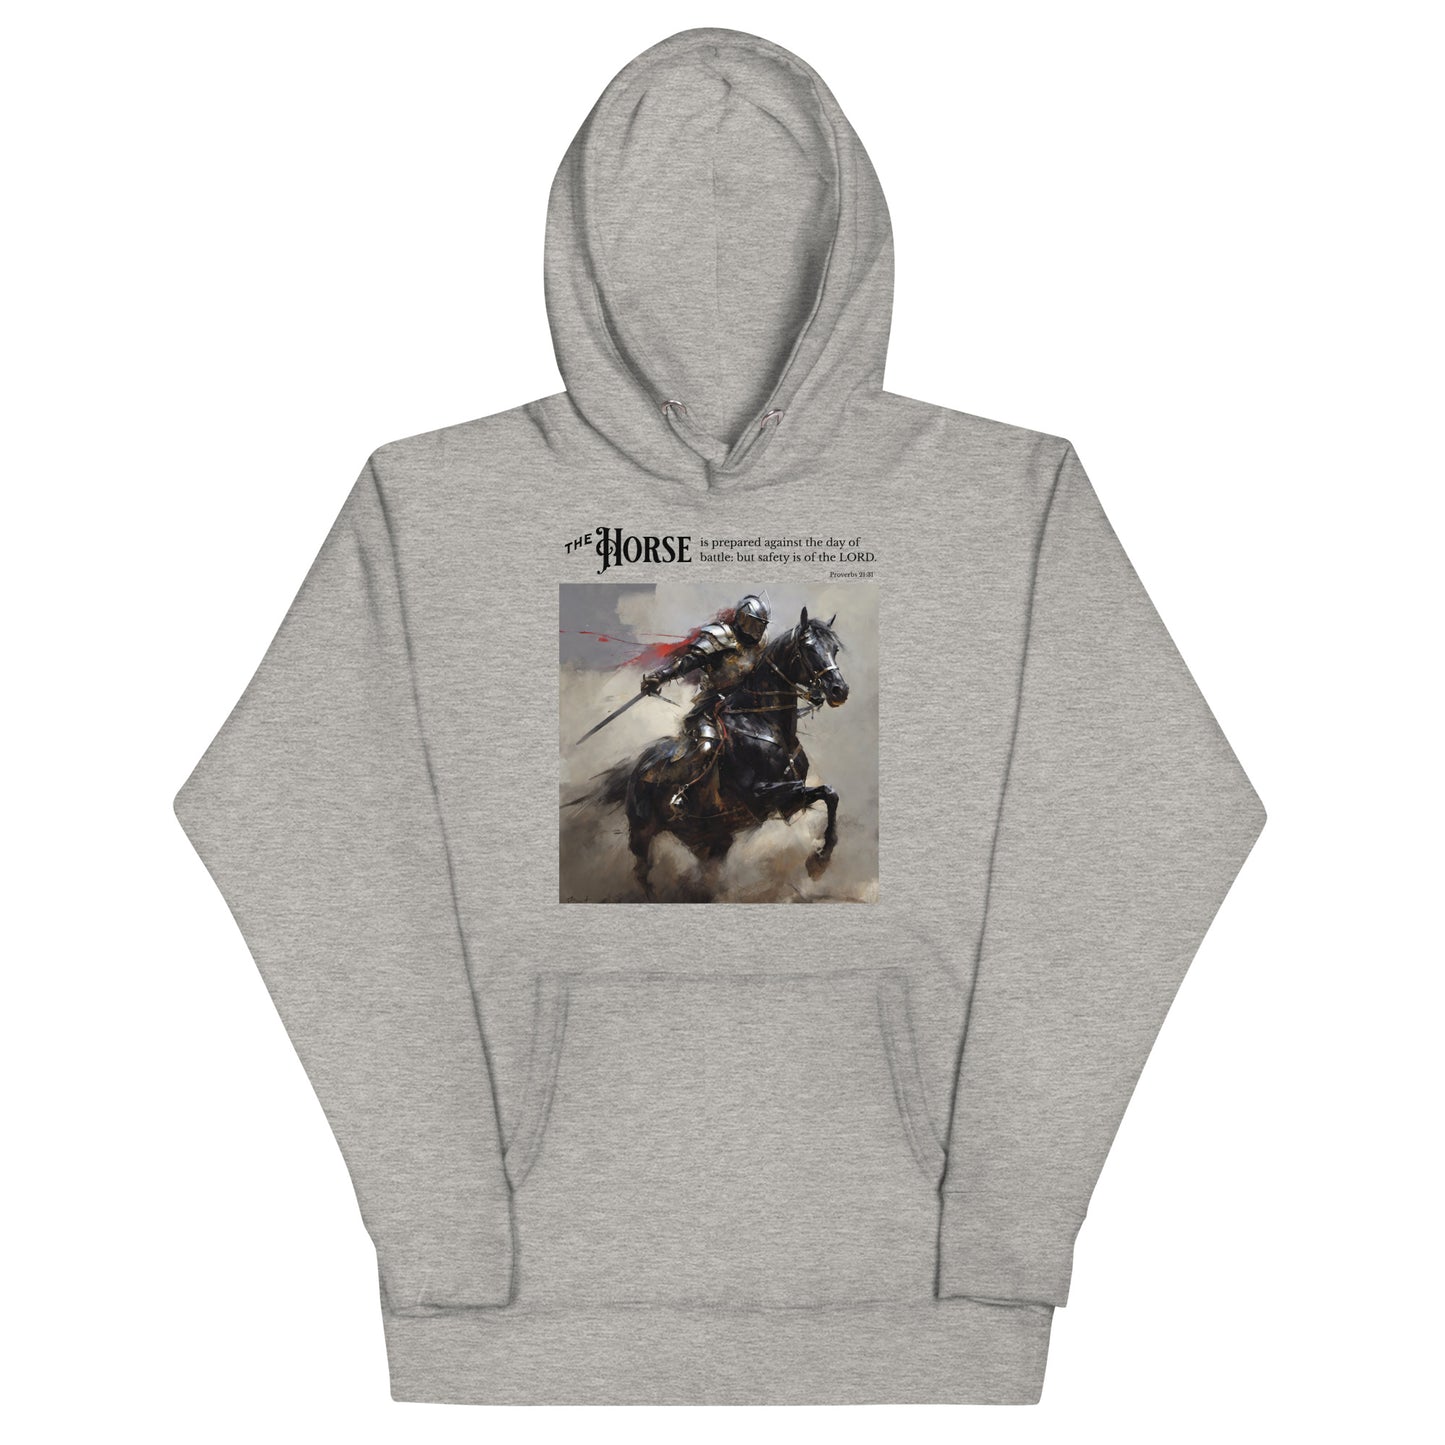 Horse and Knight Men's Bold Christian Hooded Sweatshirt Carbon Grey